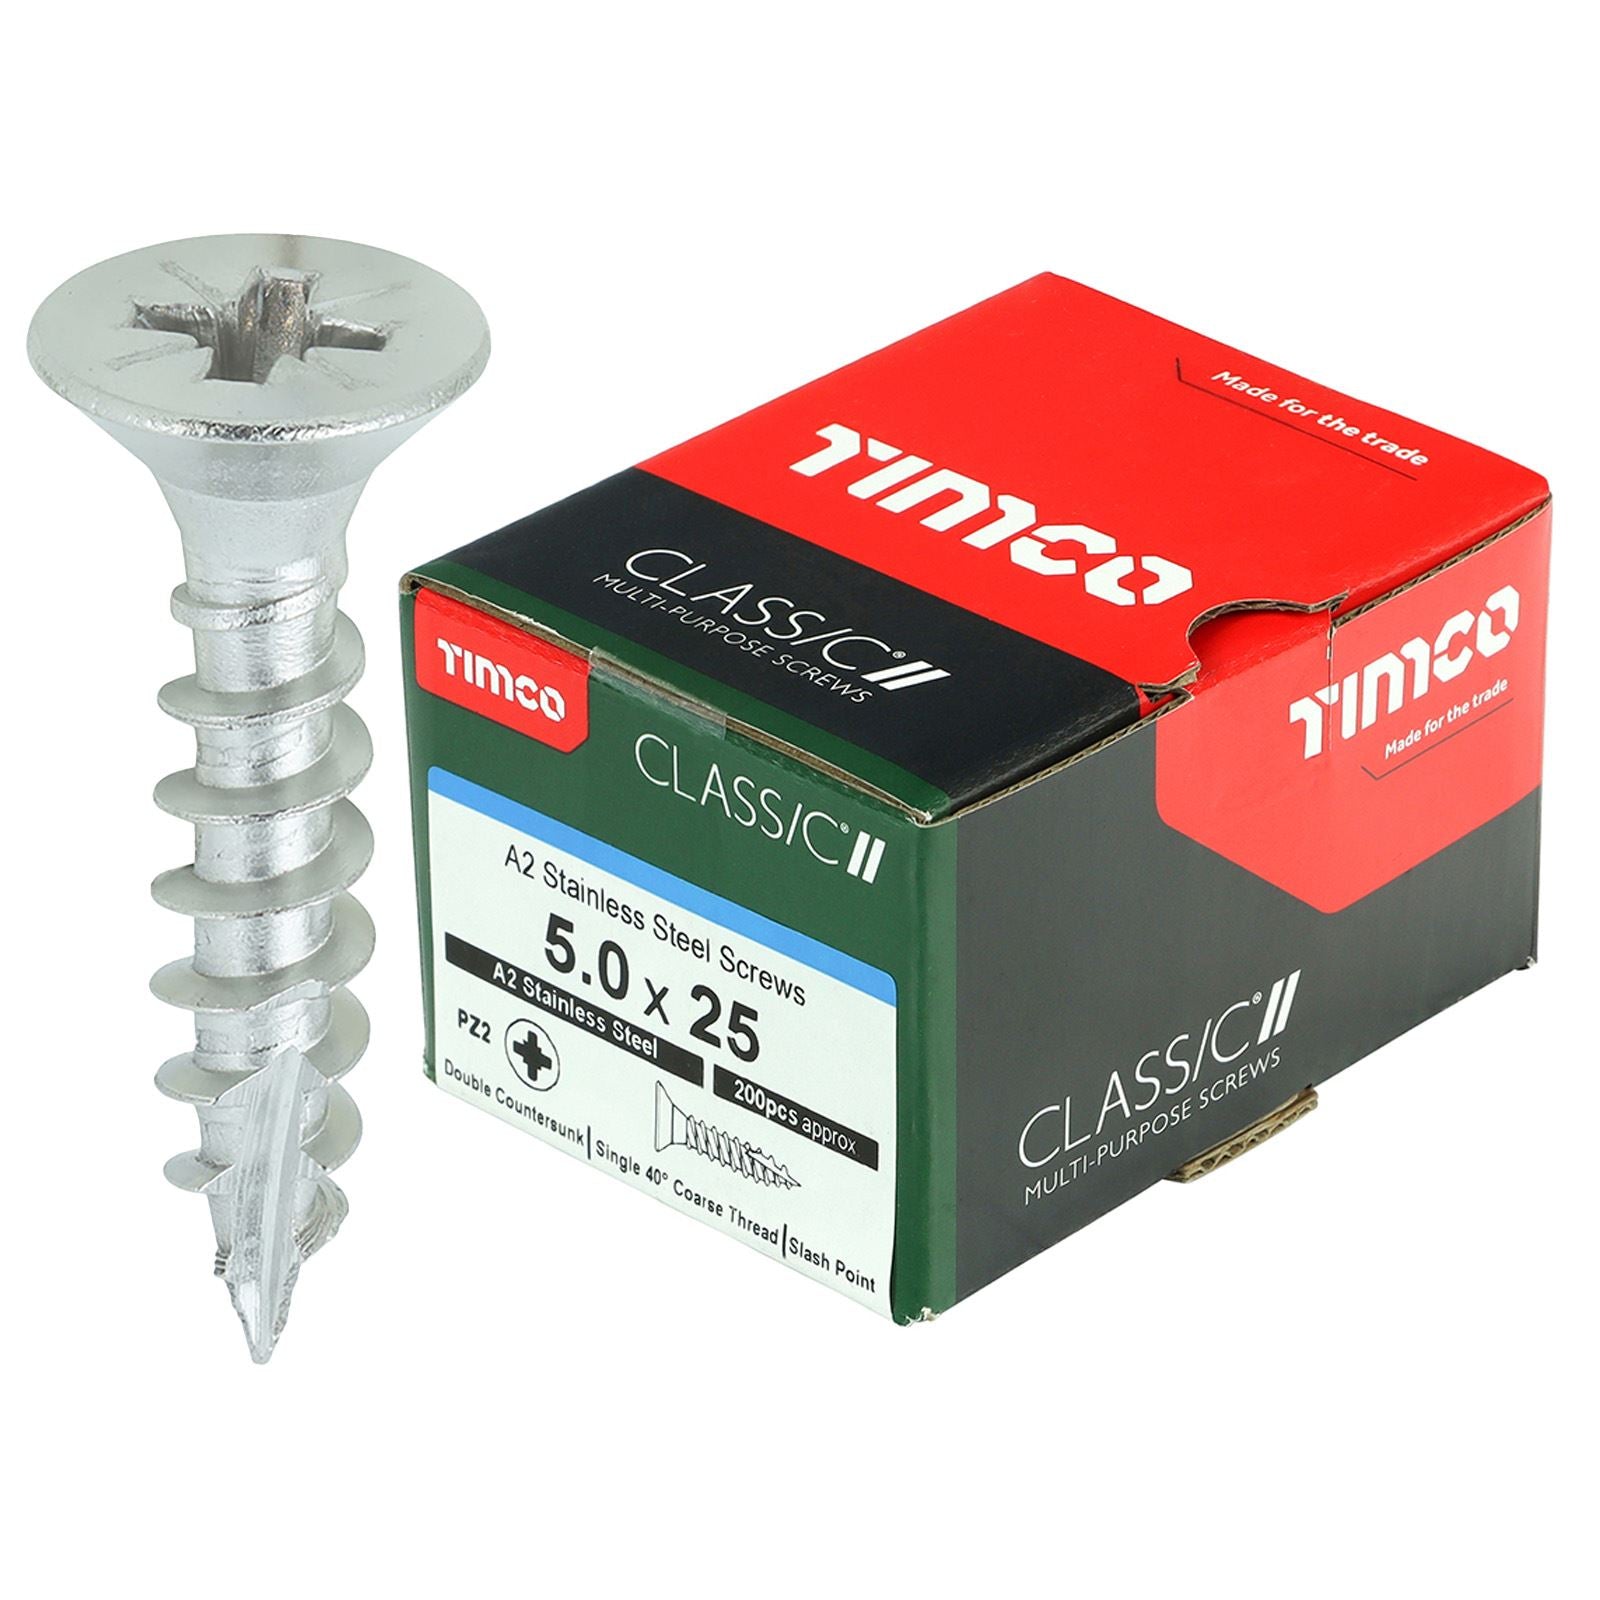 TIMCO Classic Multi Purpose Screws A2 Stainless Steel Double Countersunk Boxed - Choose Size